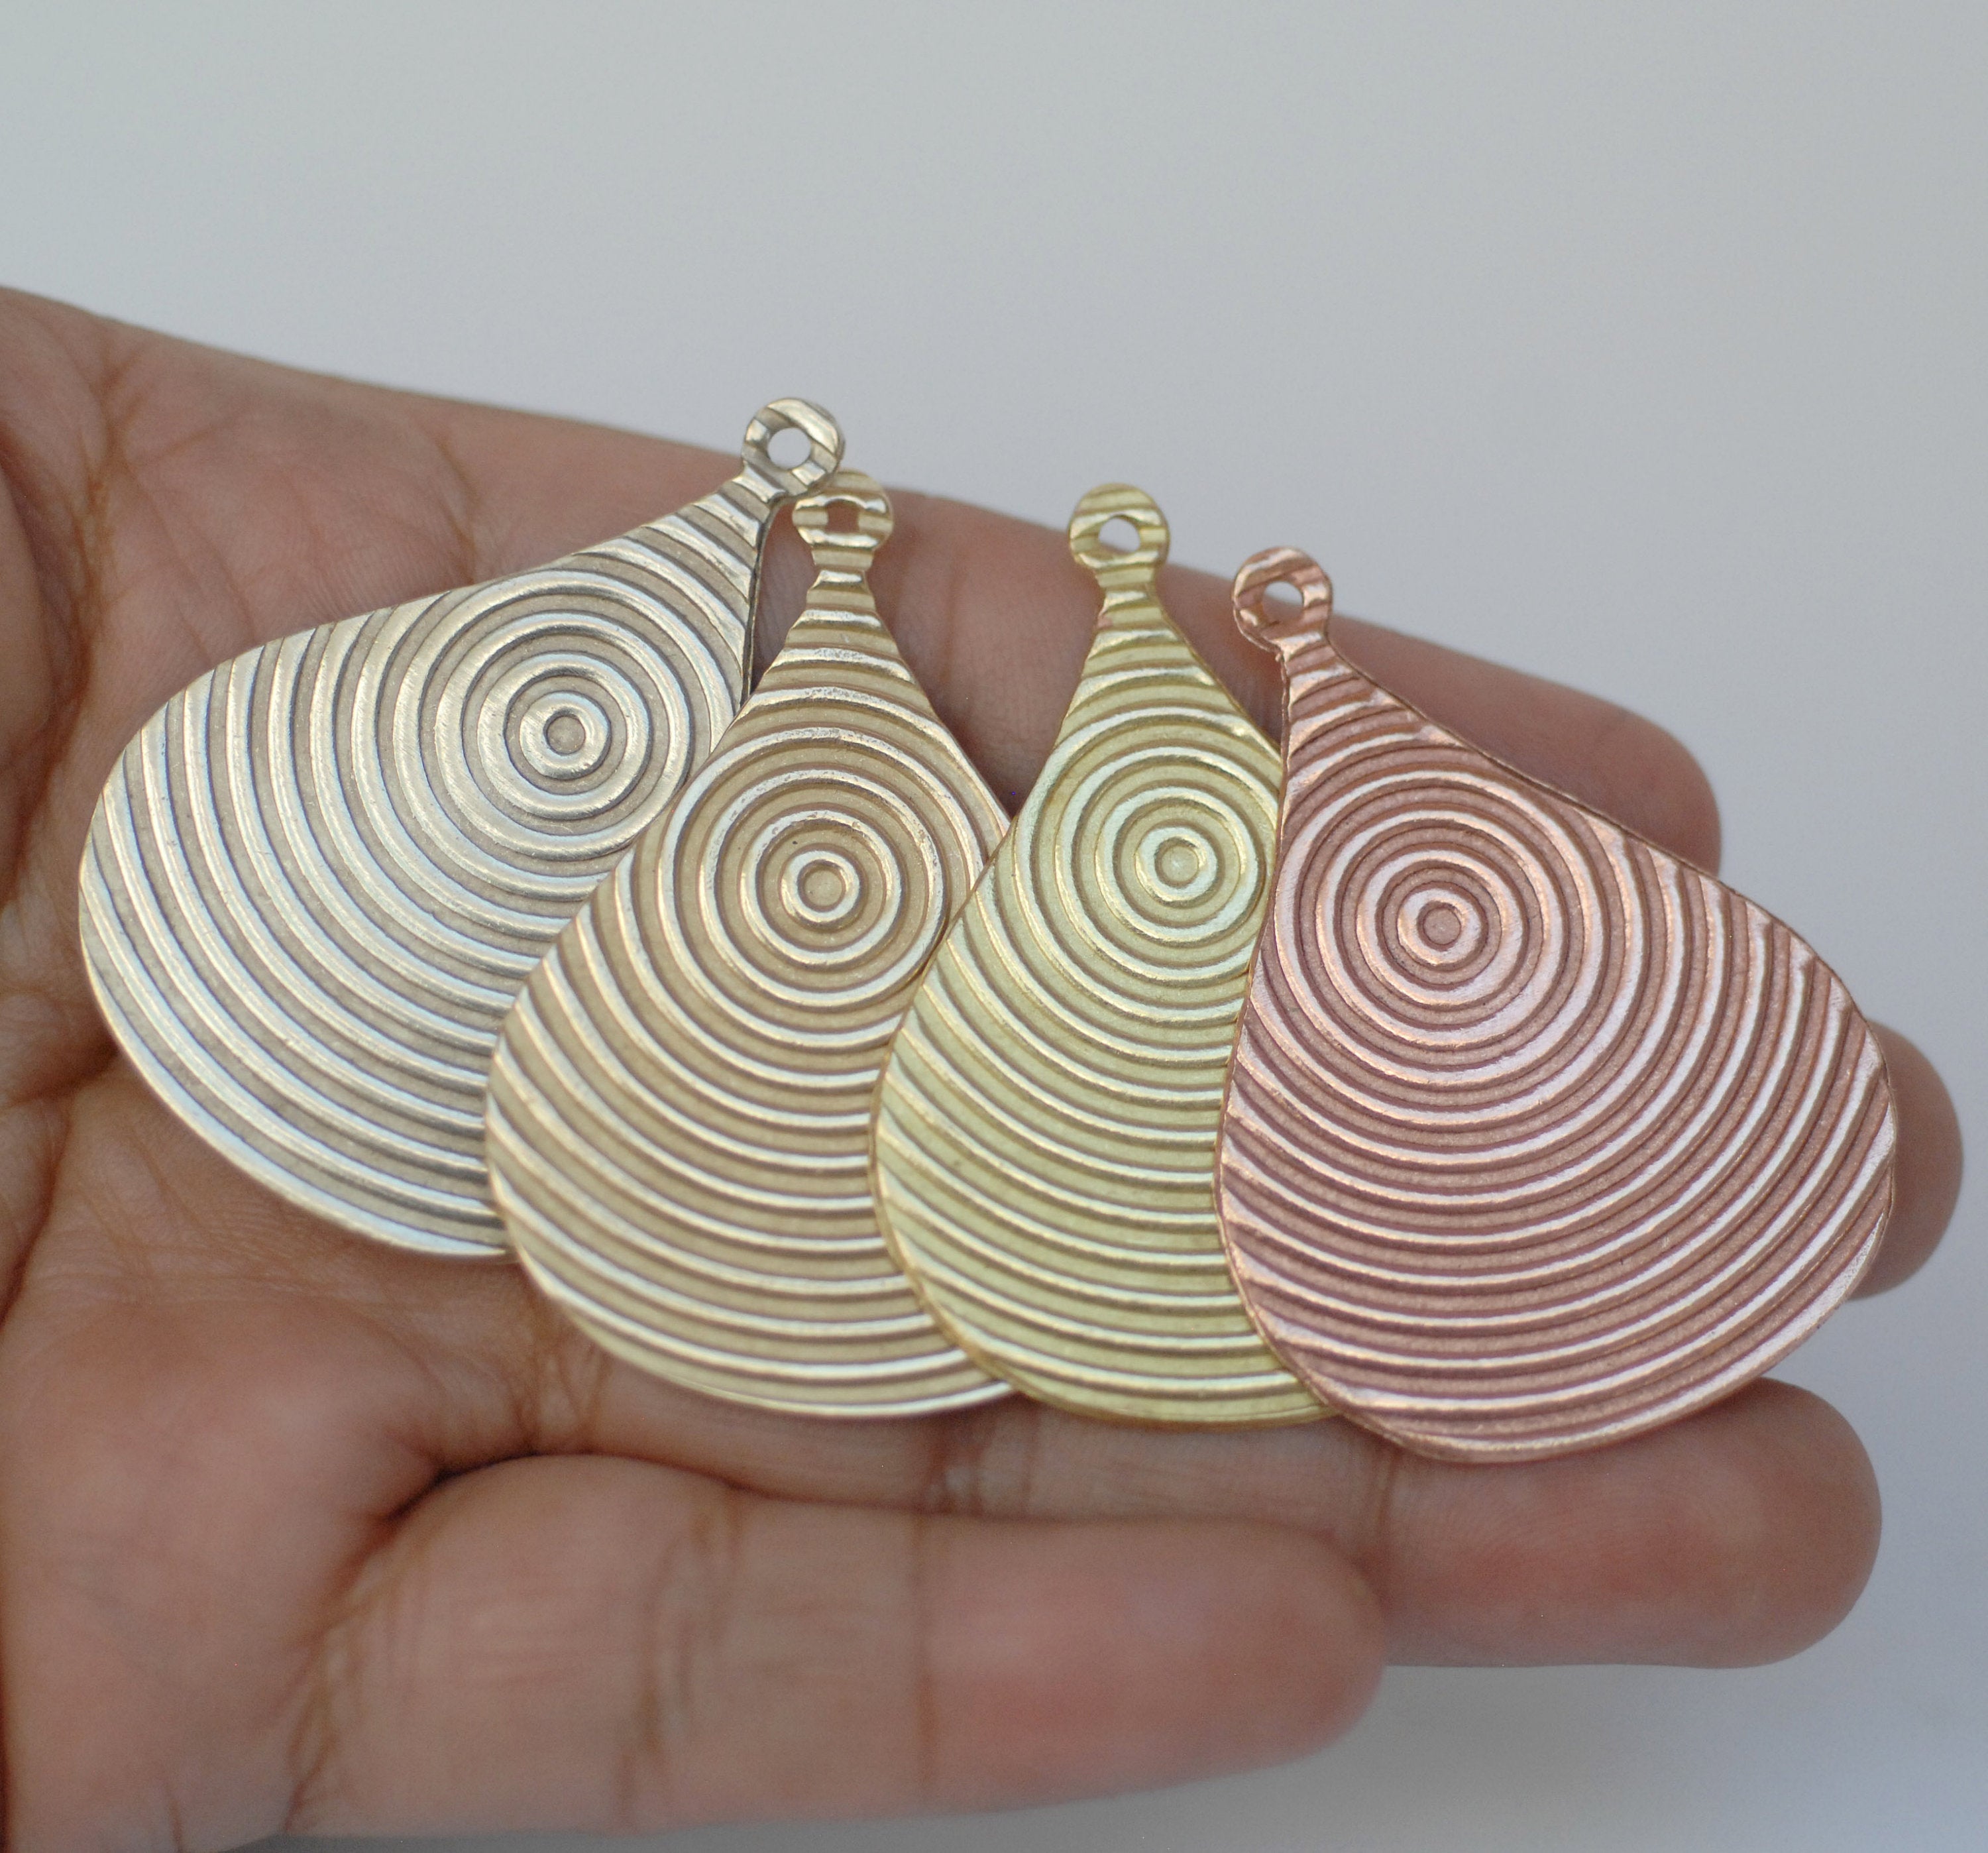 Arabic teardrop shape w/ concentric circle rising sun texture metal blanks for earrings or for pendants with holes